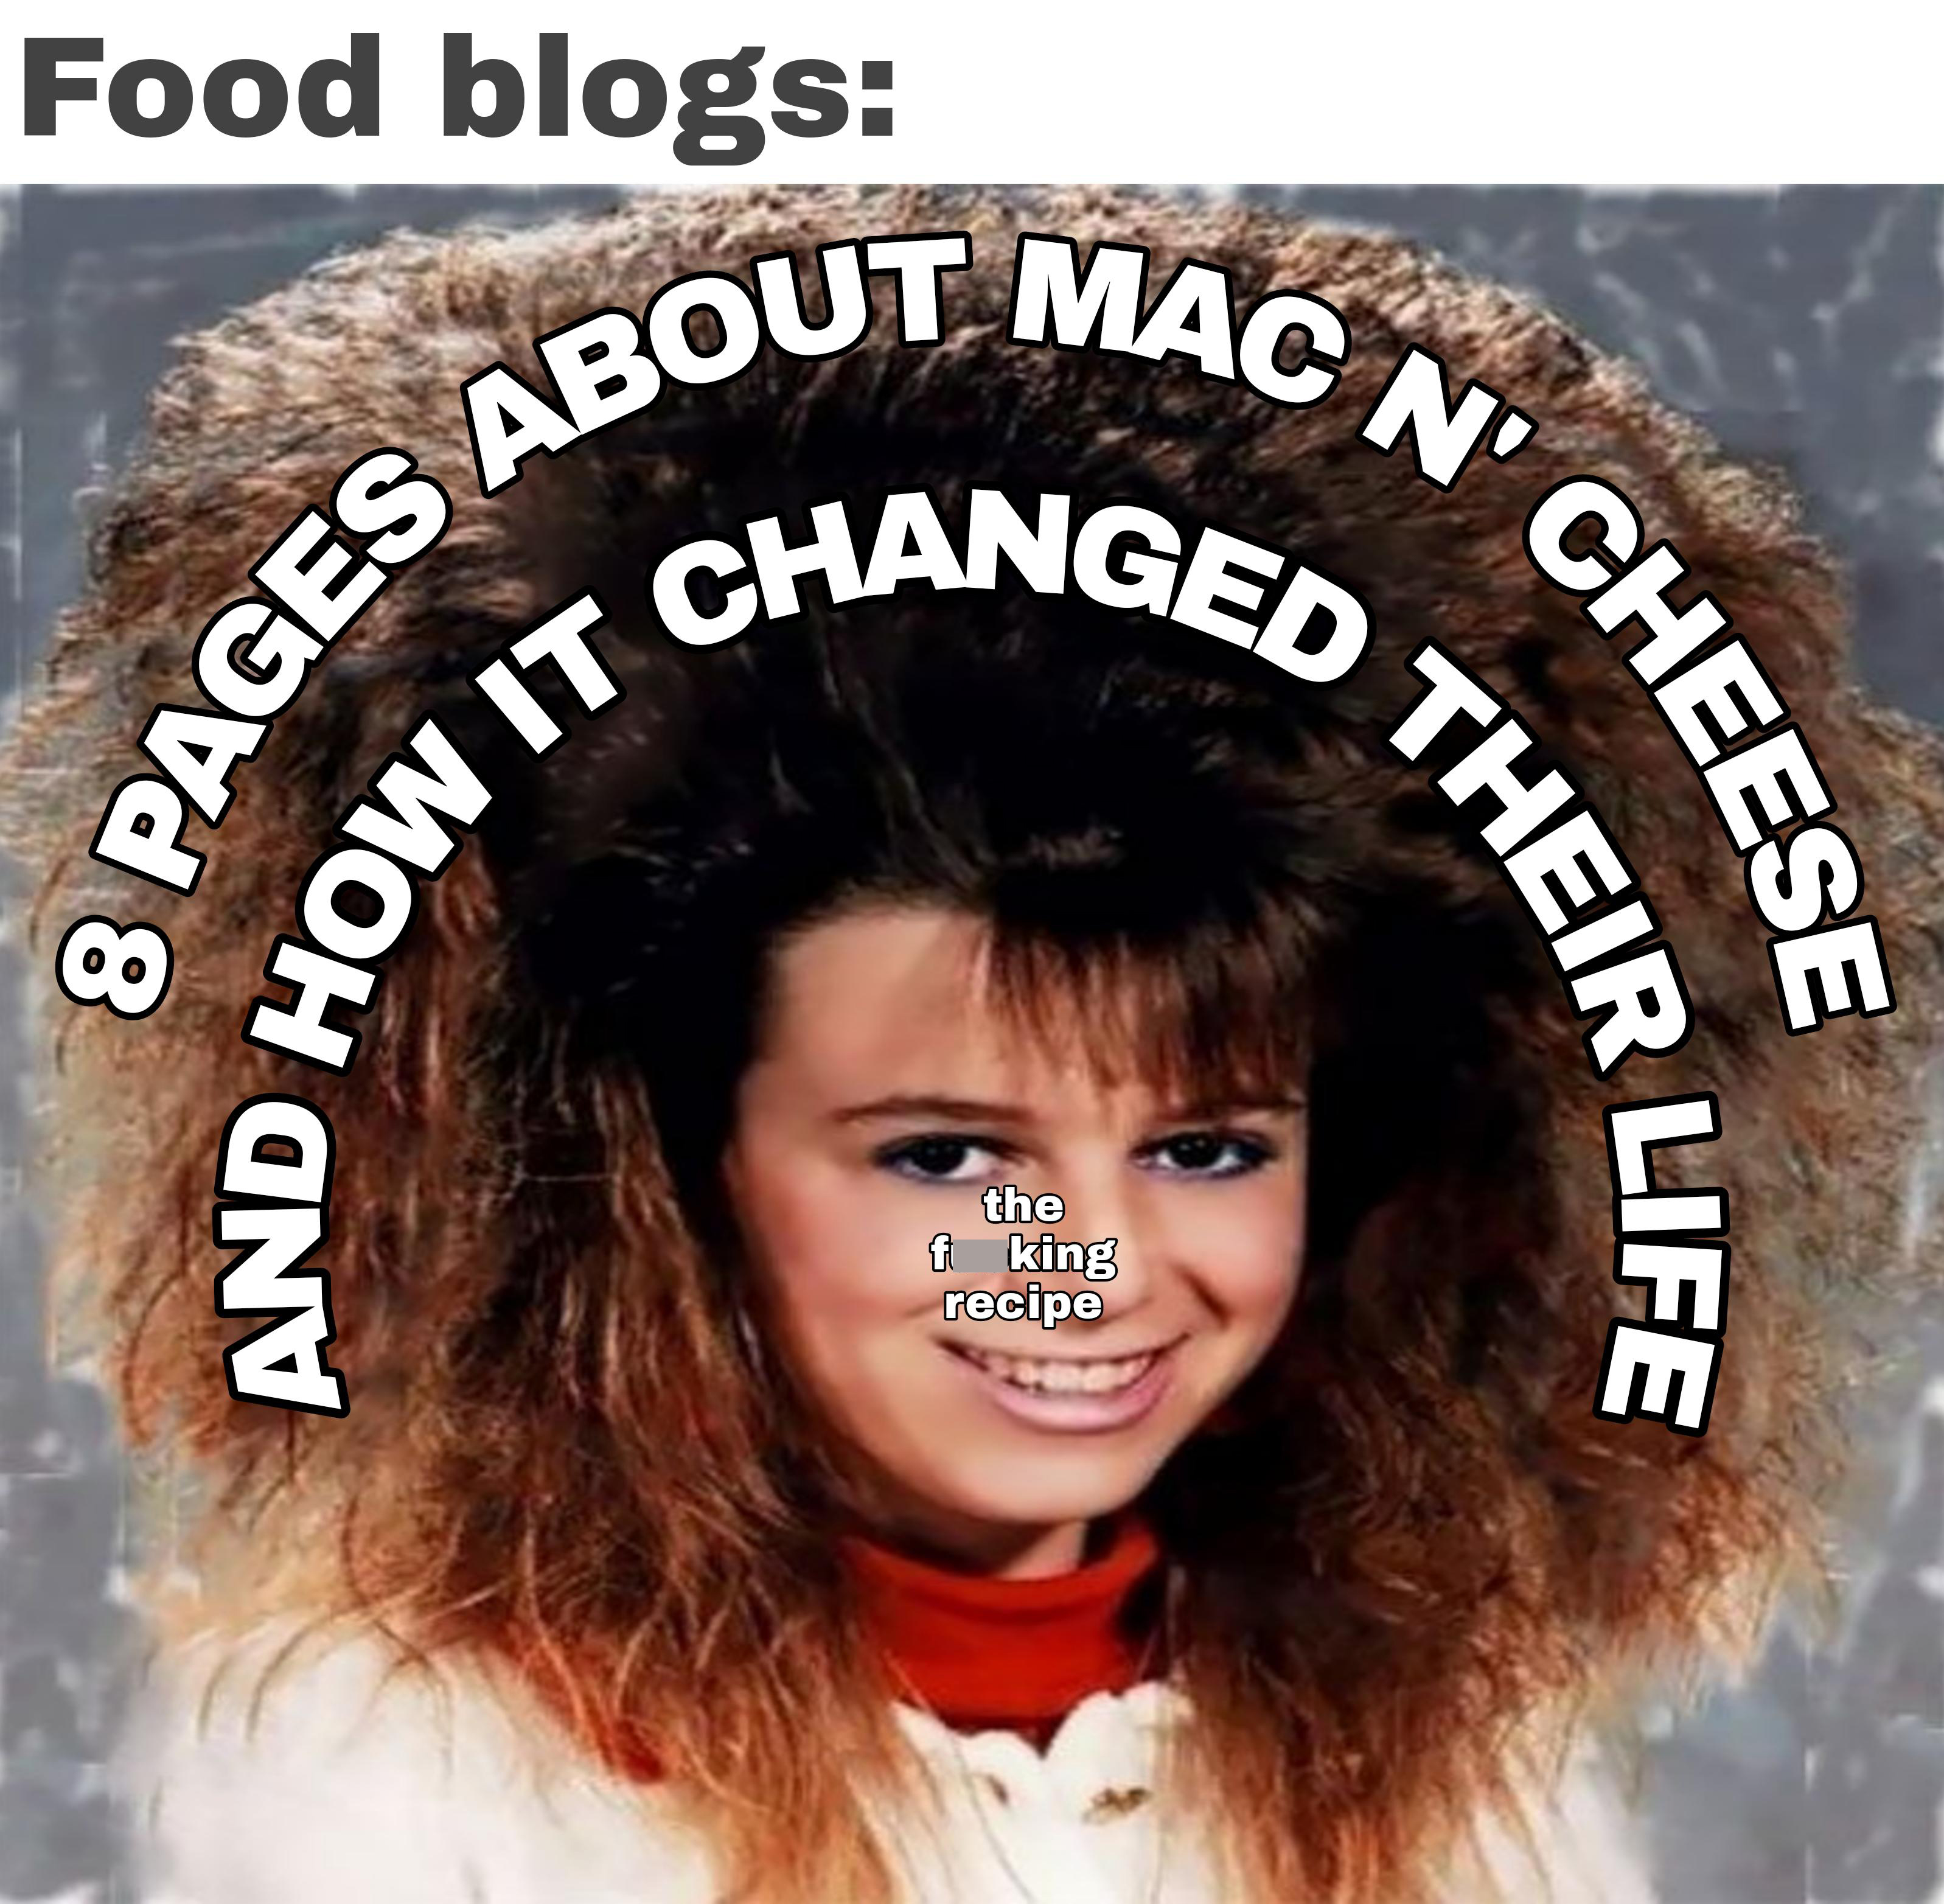 ahit - Food blogs Pages About, Mac N' Chees Changed 8 And How It Their the f king recipe Life